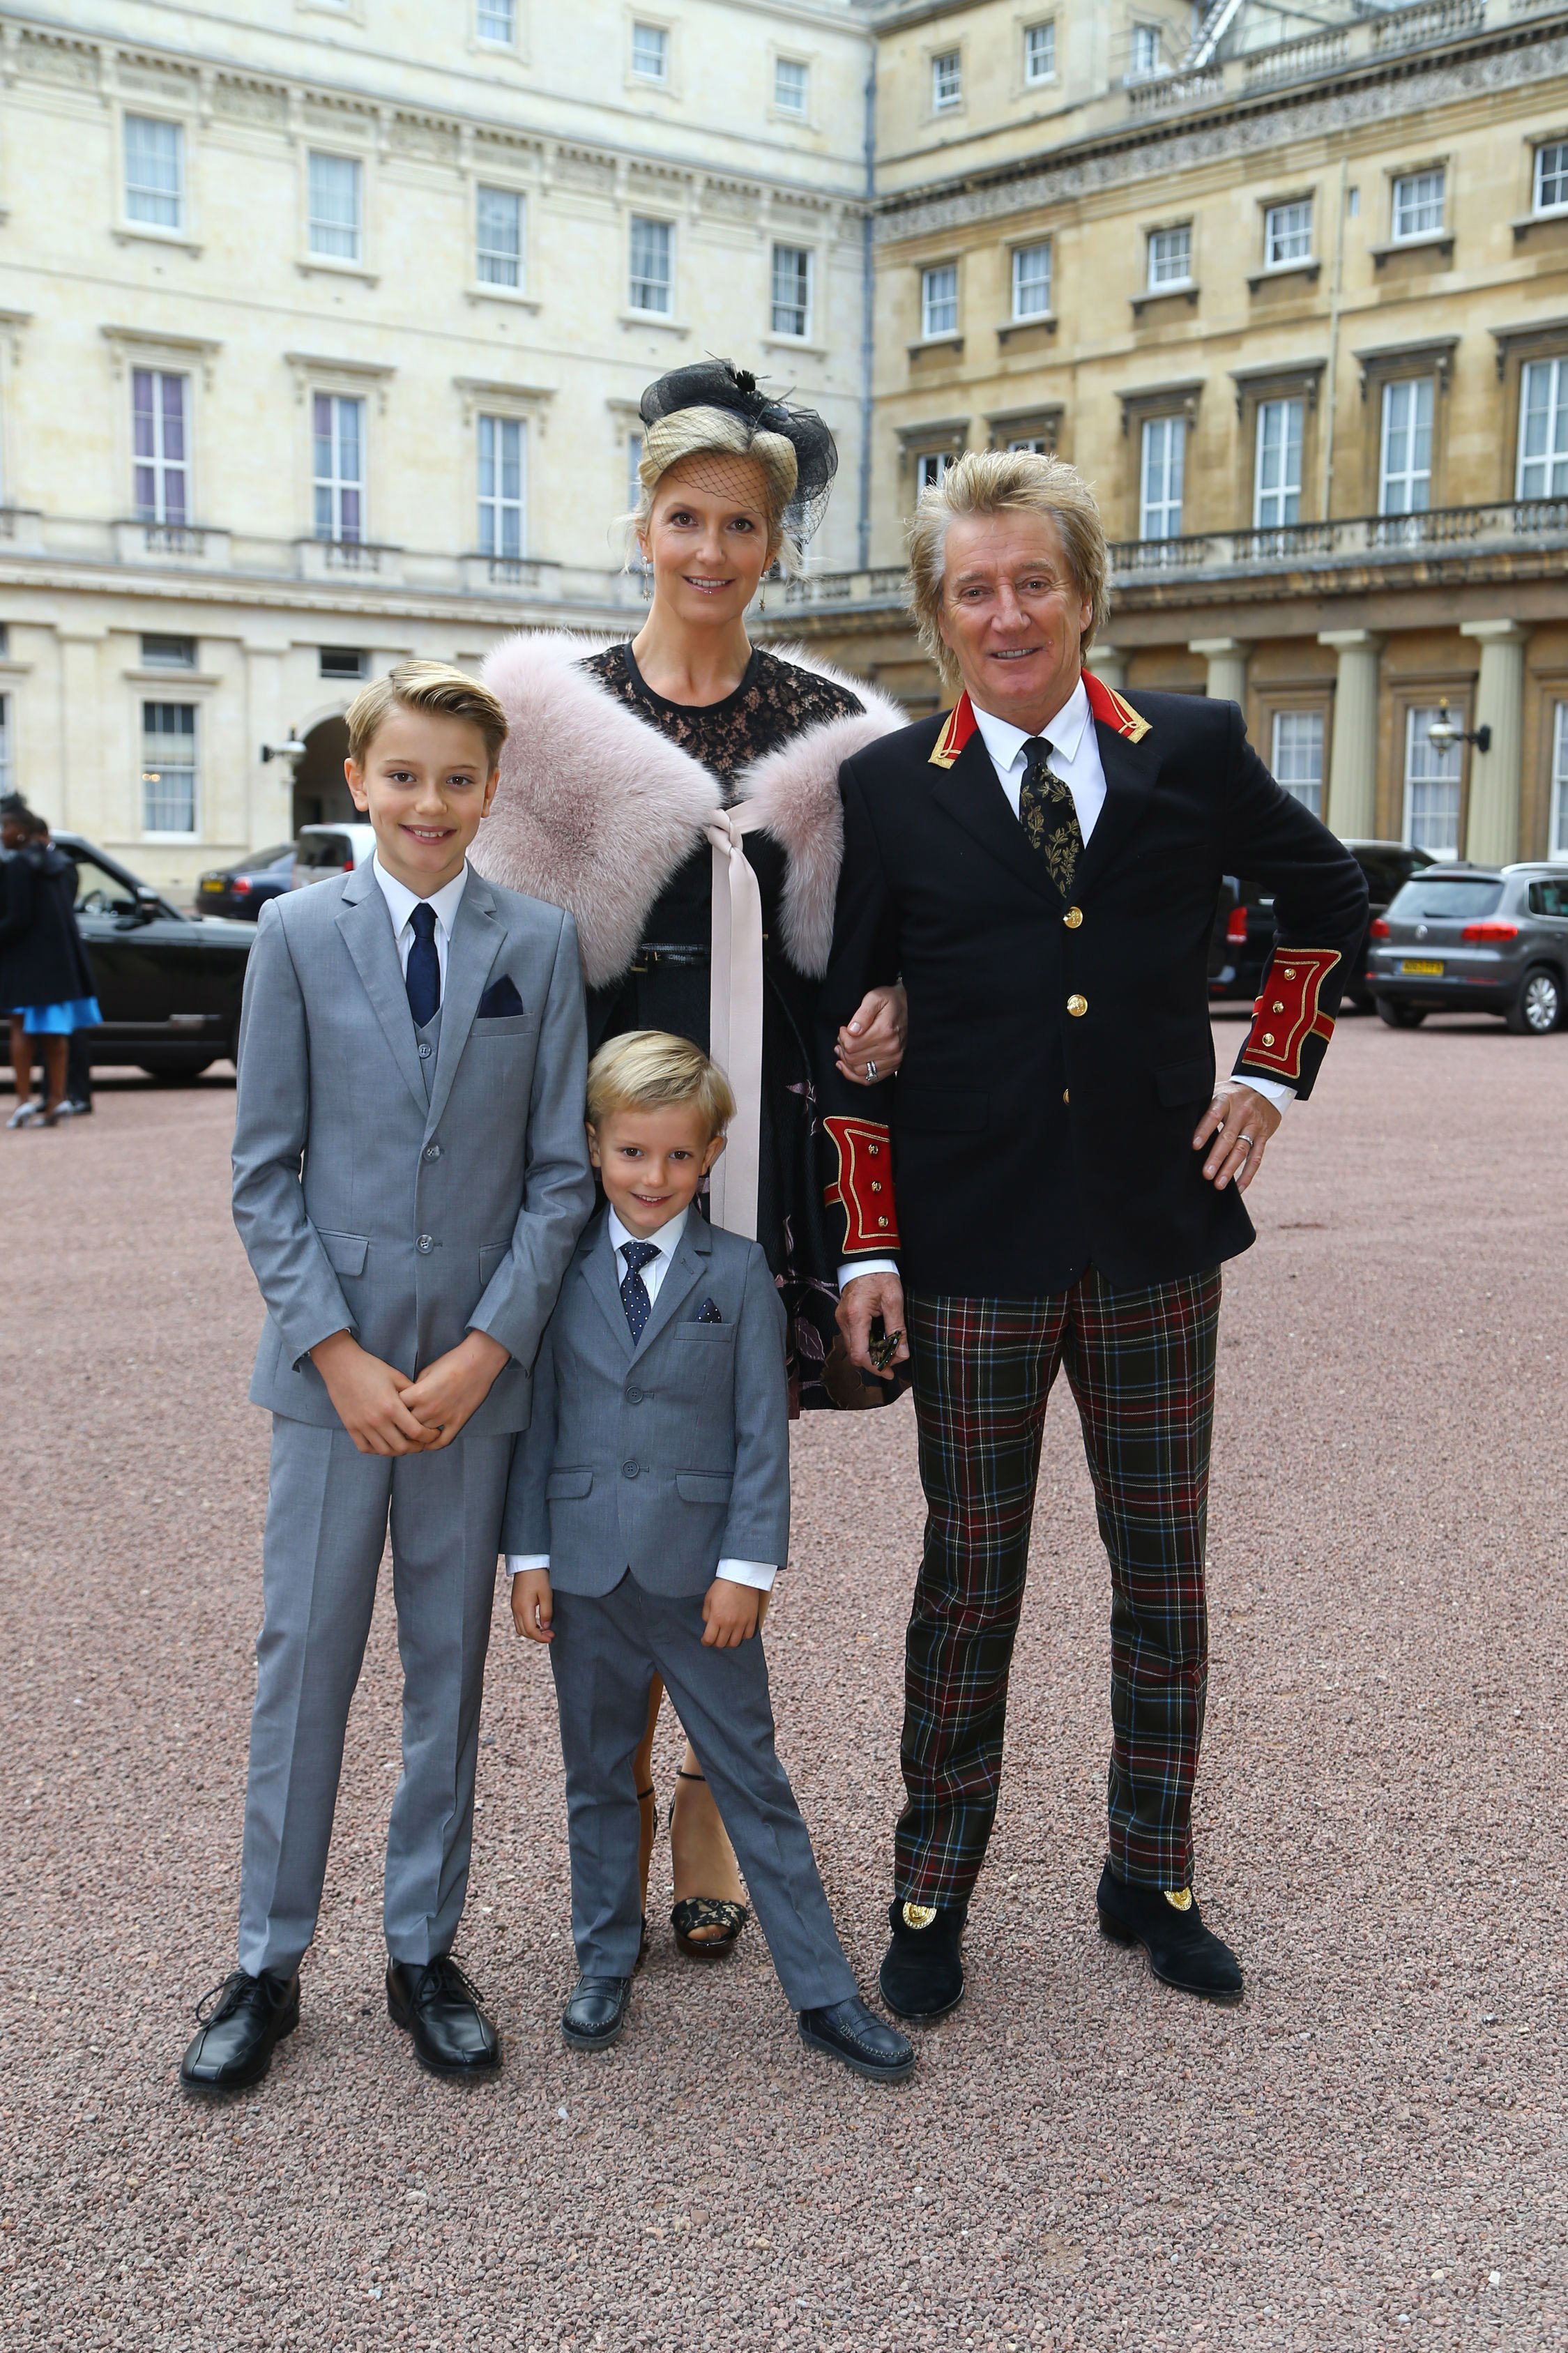 Rod Stewart arrives at Buckingham Palace with his wife, Penny Lancaster and children Alastair and Aiden, ahead of him receiving his knighthood in recognition of his services to music and charity on October 11, 2016 | Photo: GettyImages